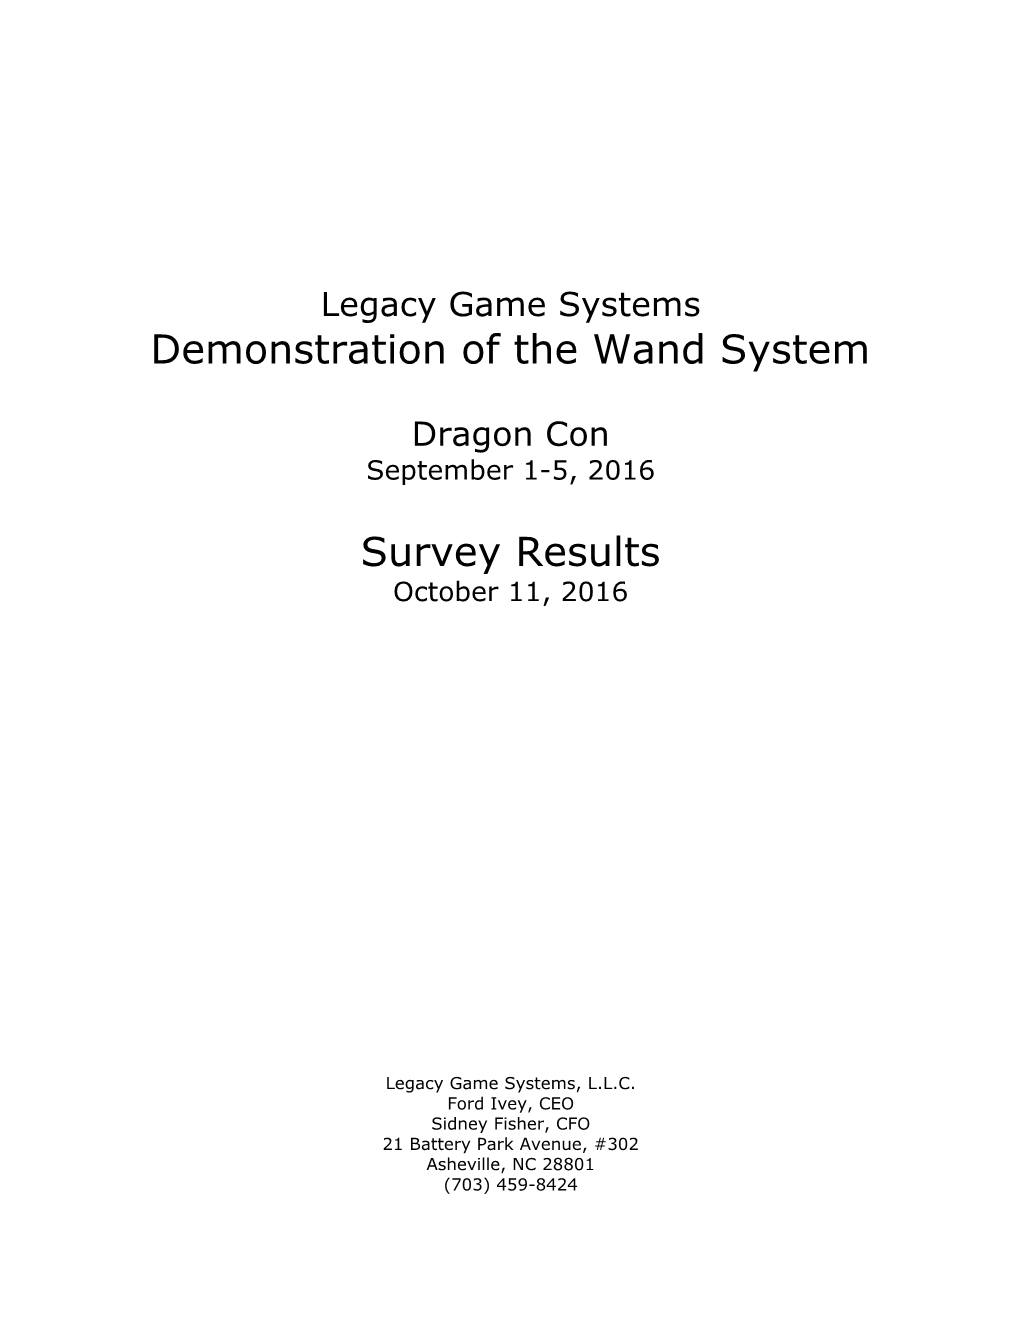 Demonstration of the Wand System